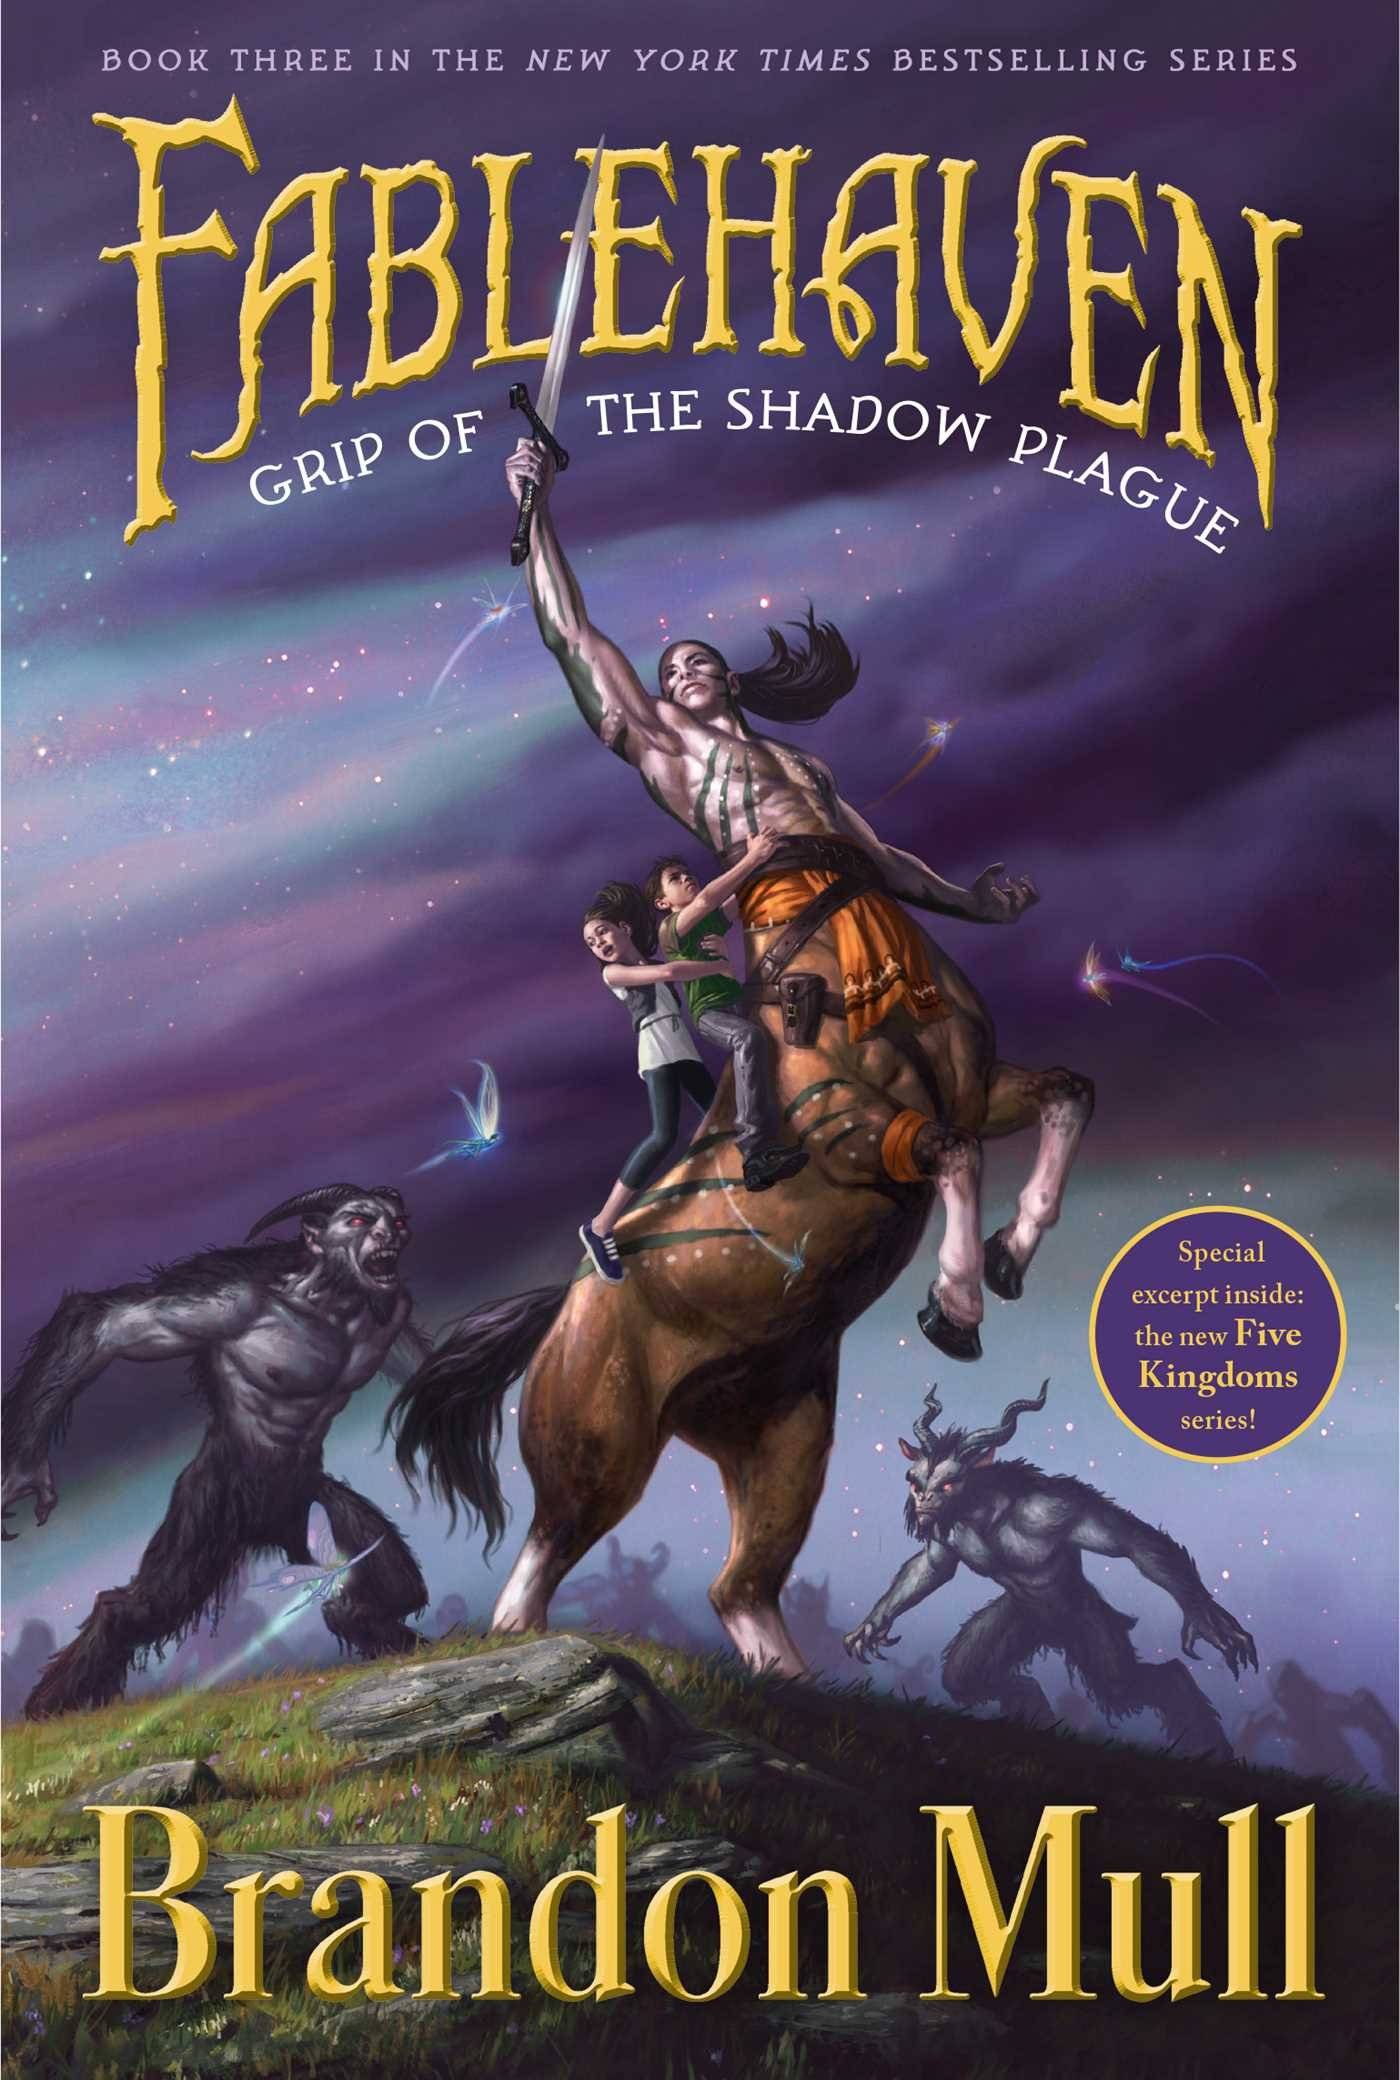 IMG : FableHaven Grip of the Shadow Plague #3